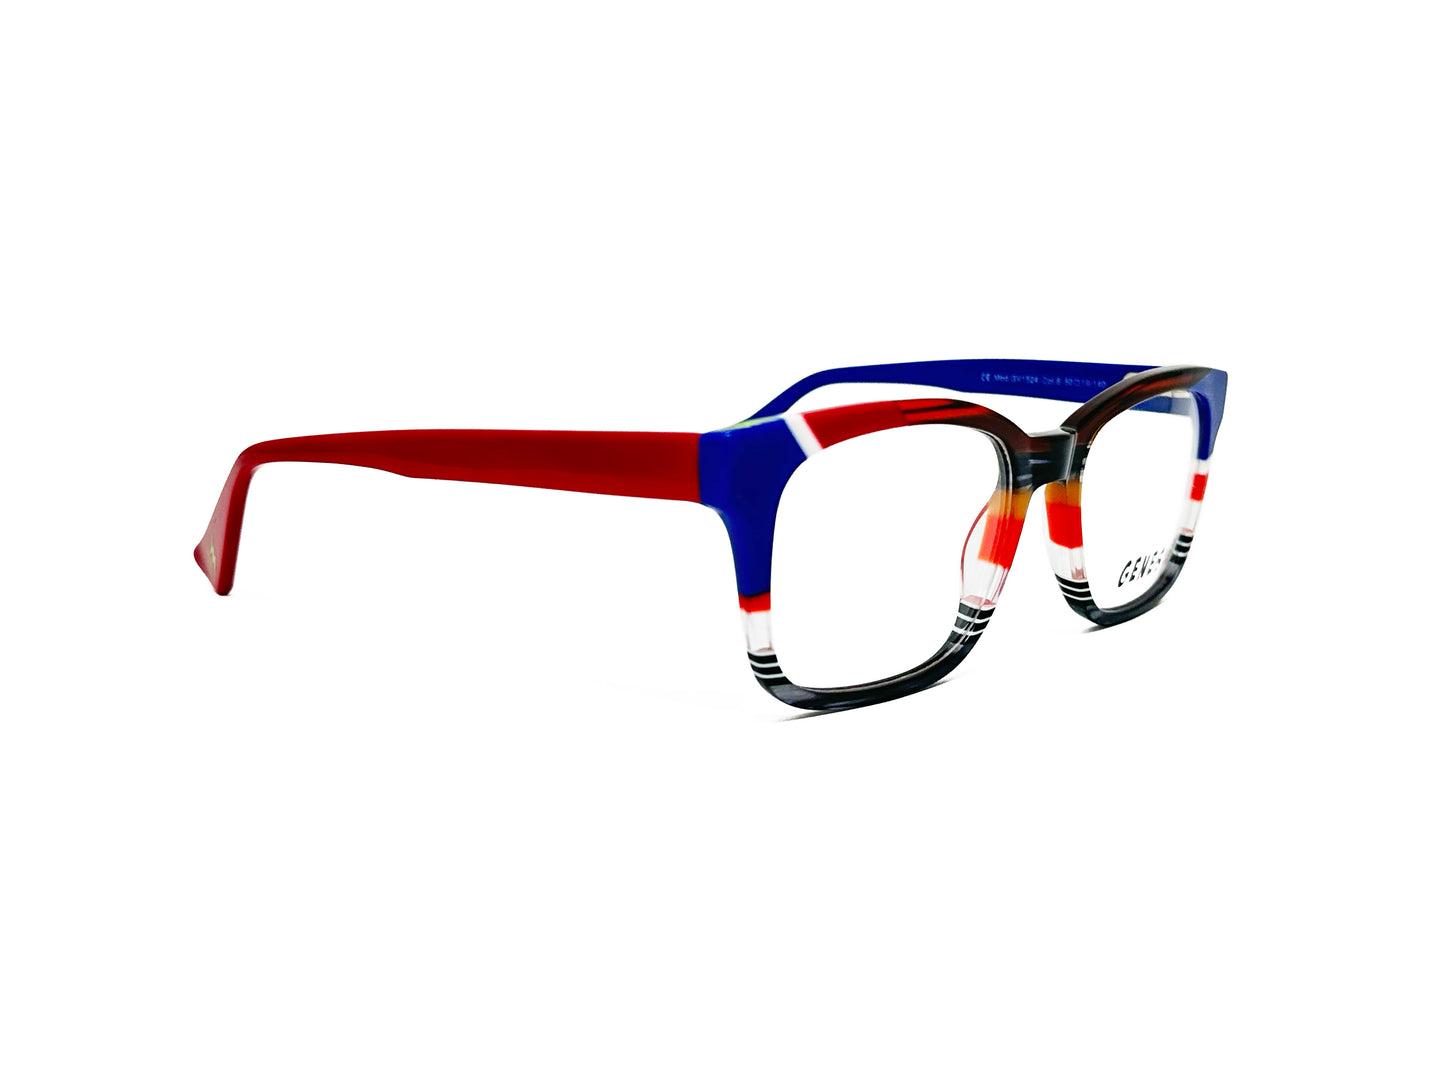 Genesis rectangular, acetate optical frame. Model: GV1524. Color: 6 - Red, blue, and transparent striping. Side view.